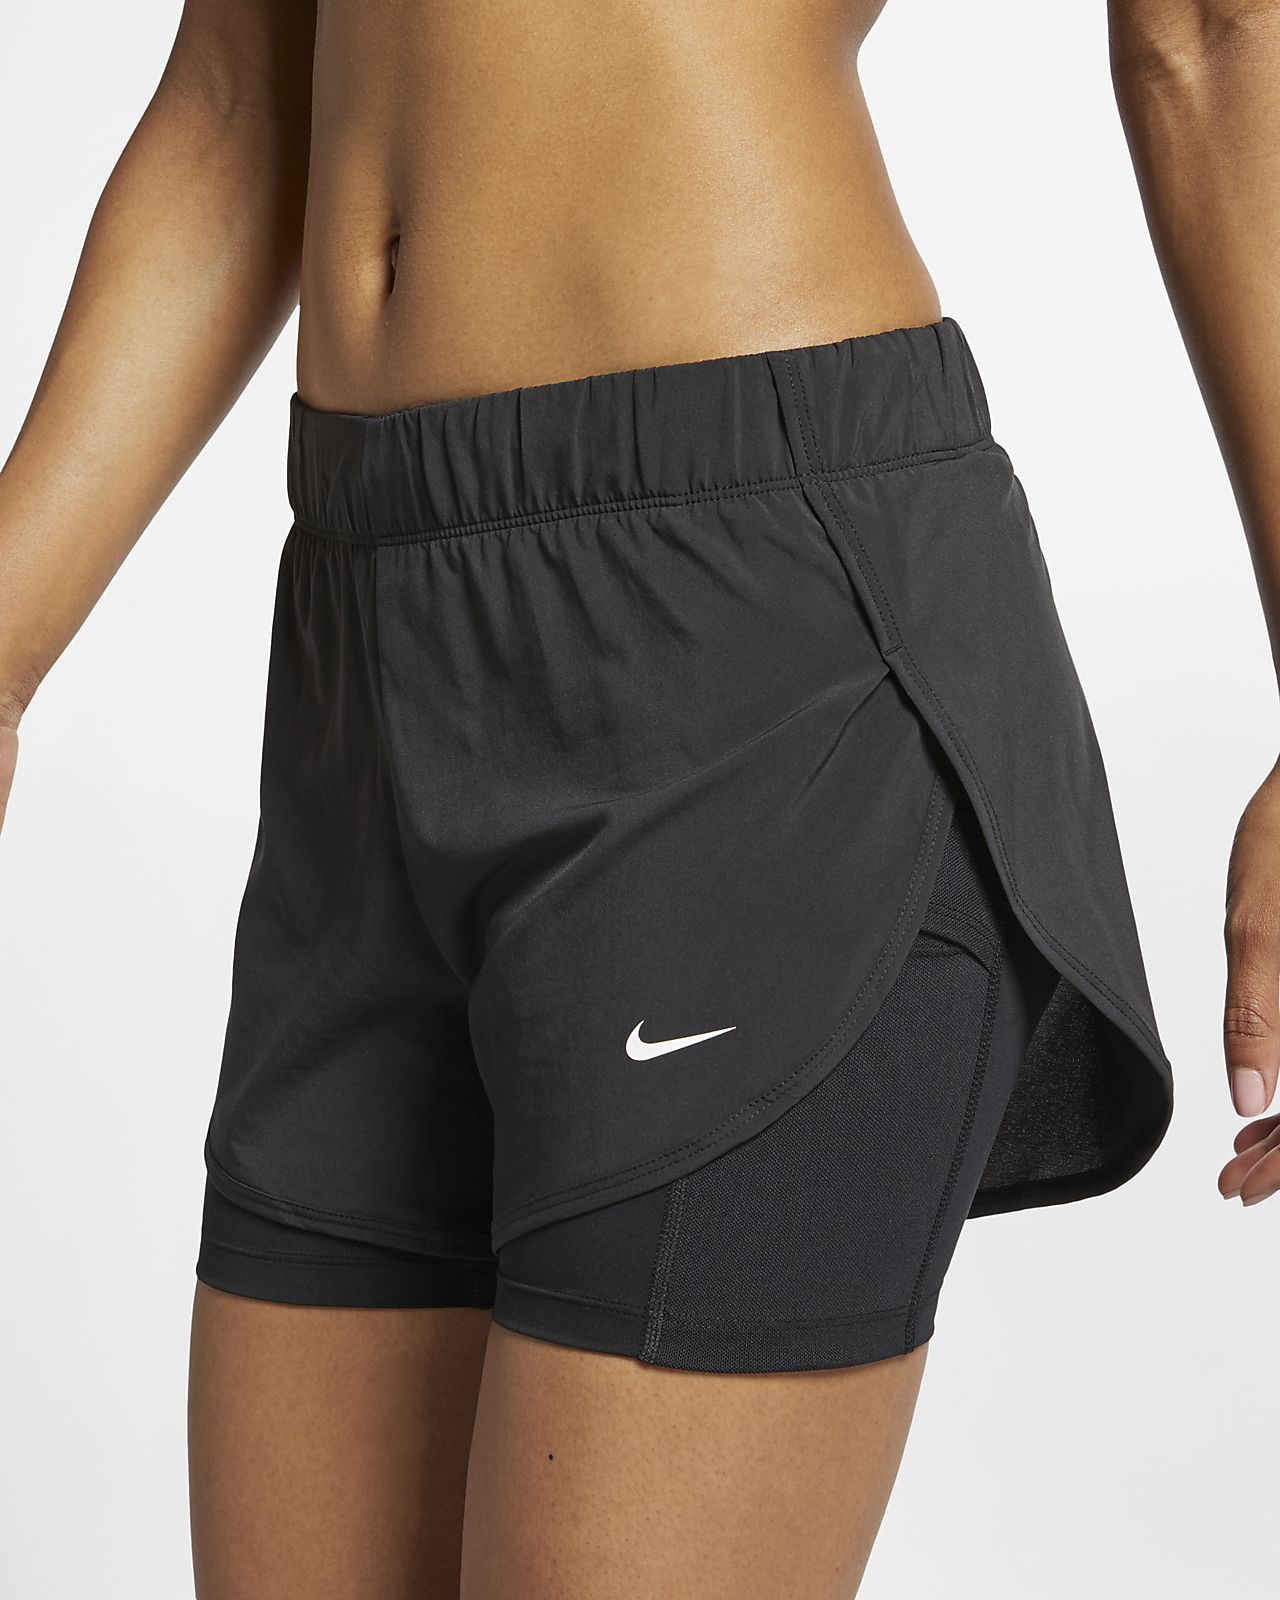 nike 10k 2 in 1 shorts Promotions